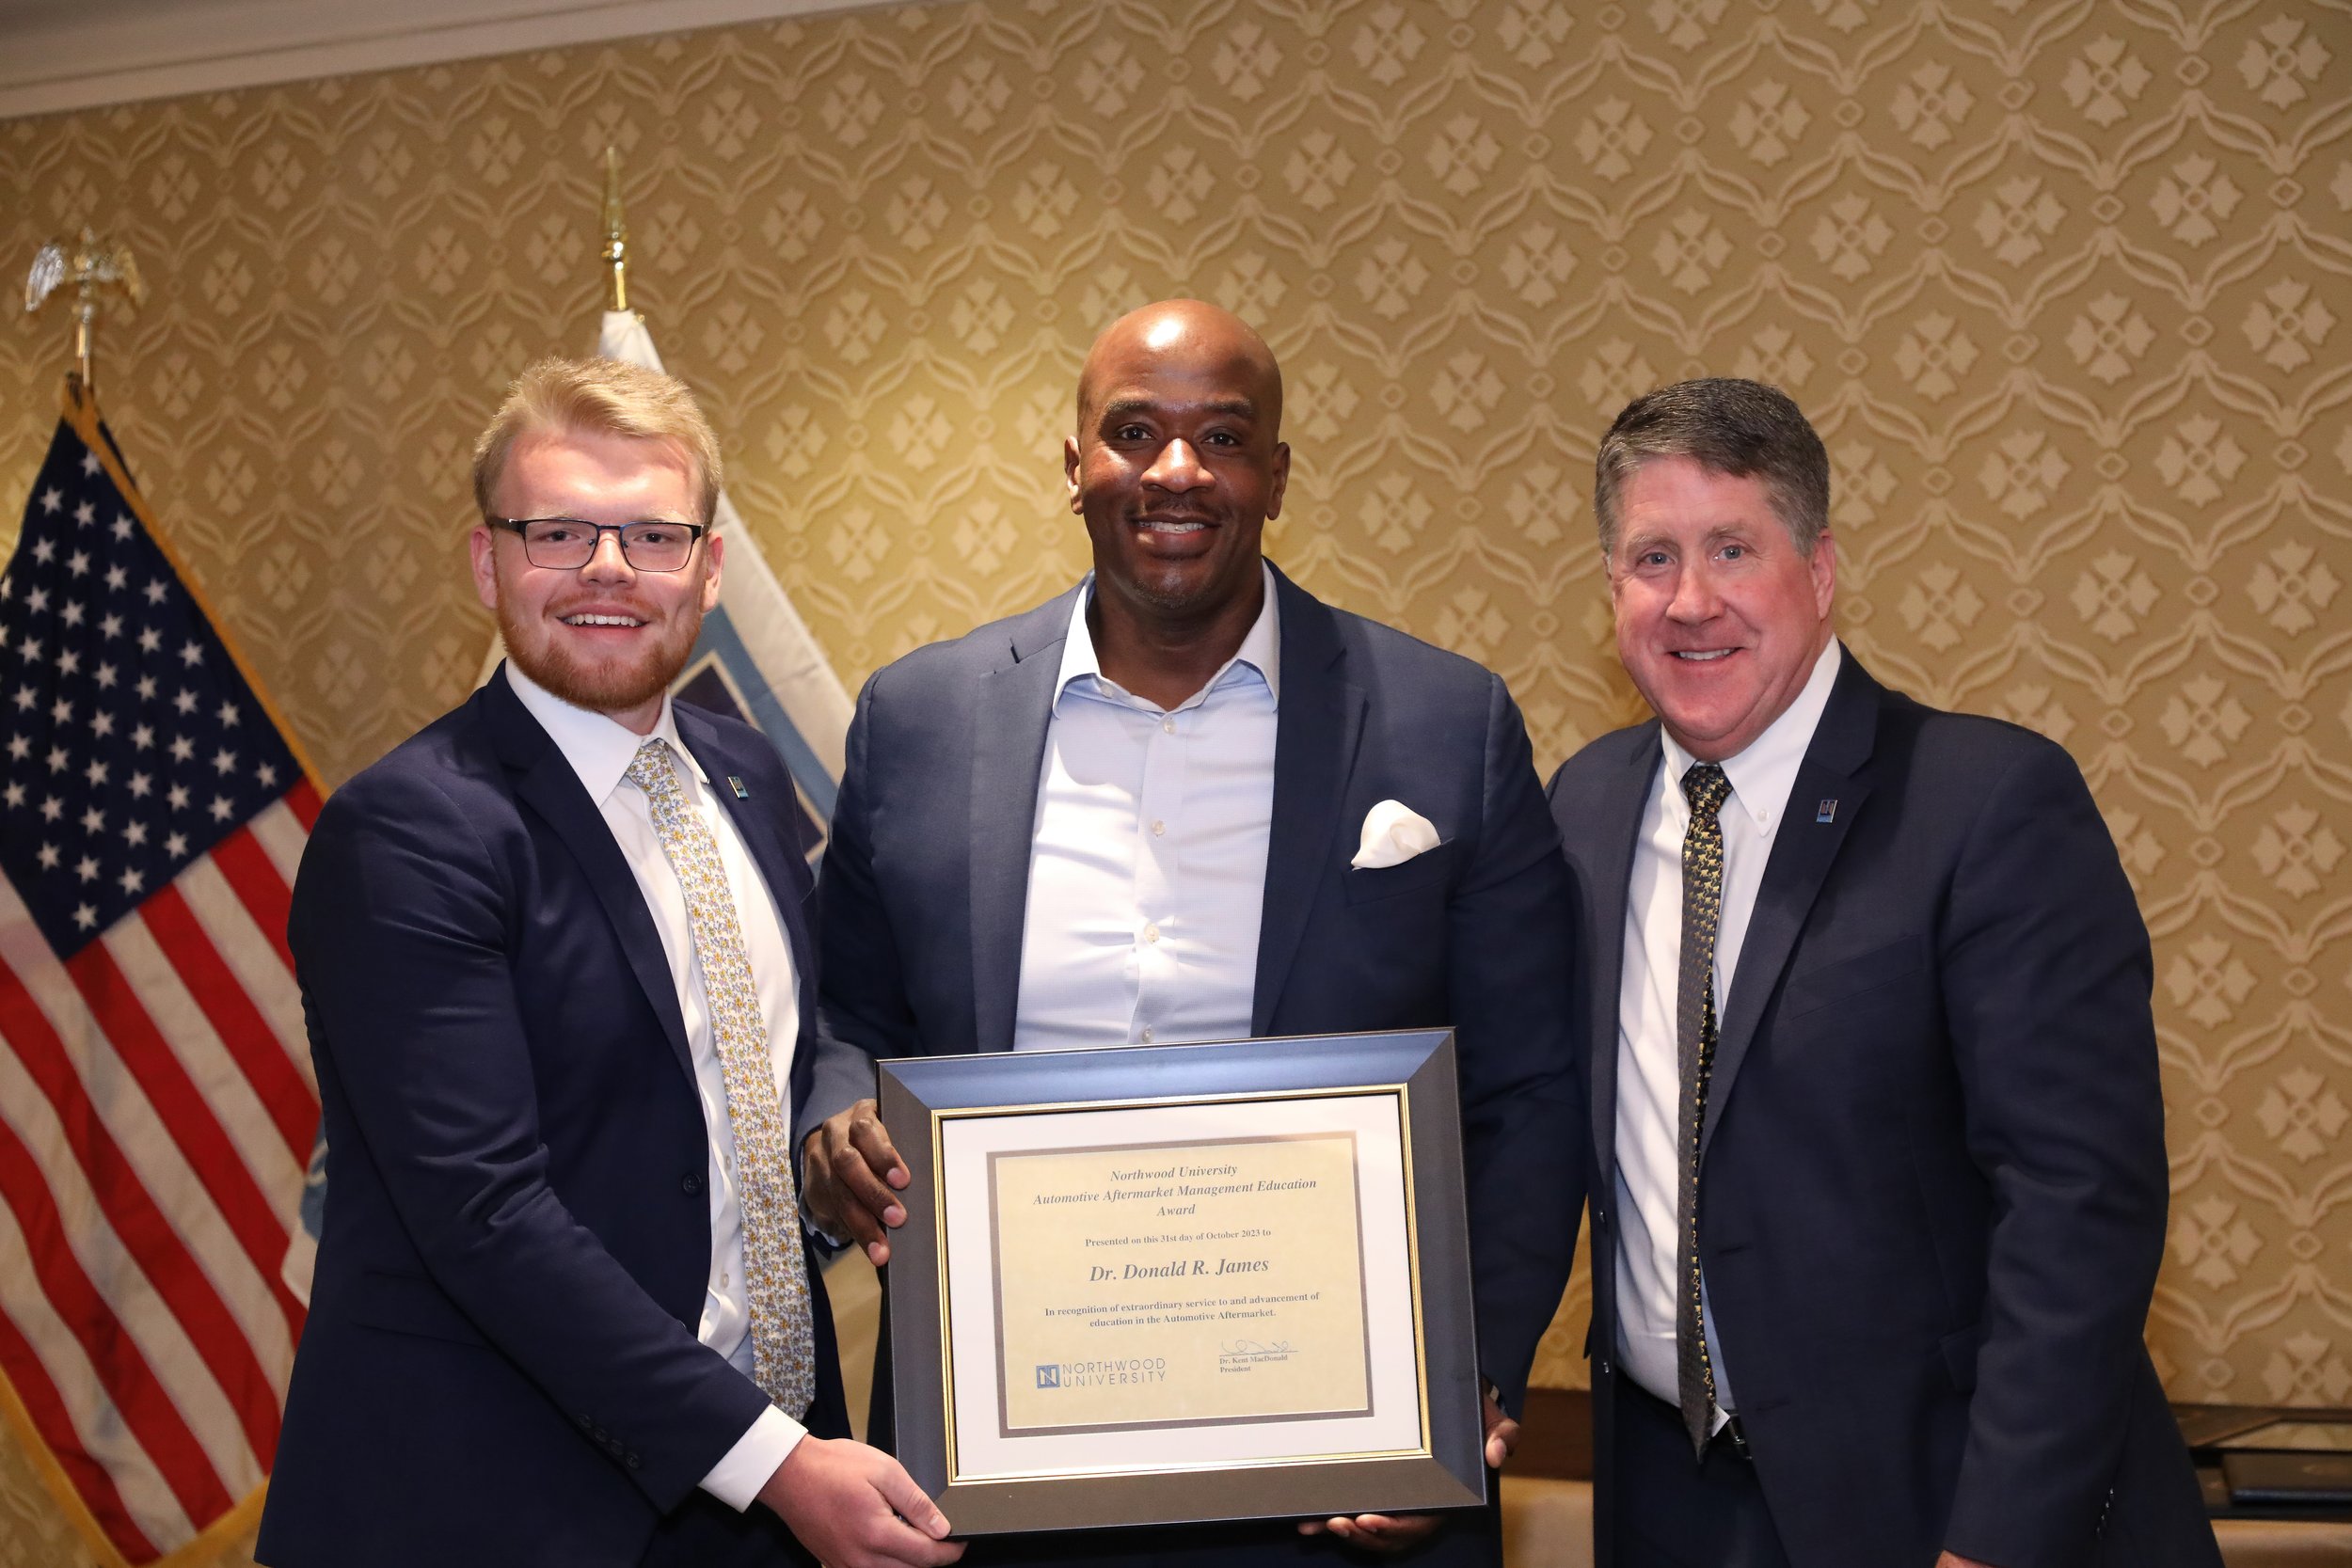 Solero Technologies CEO honored with education award